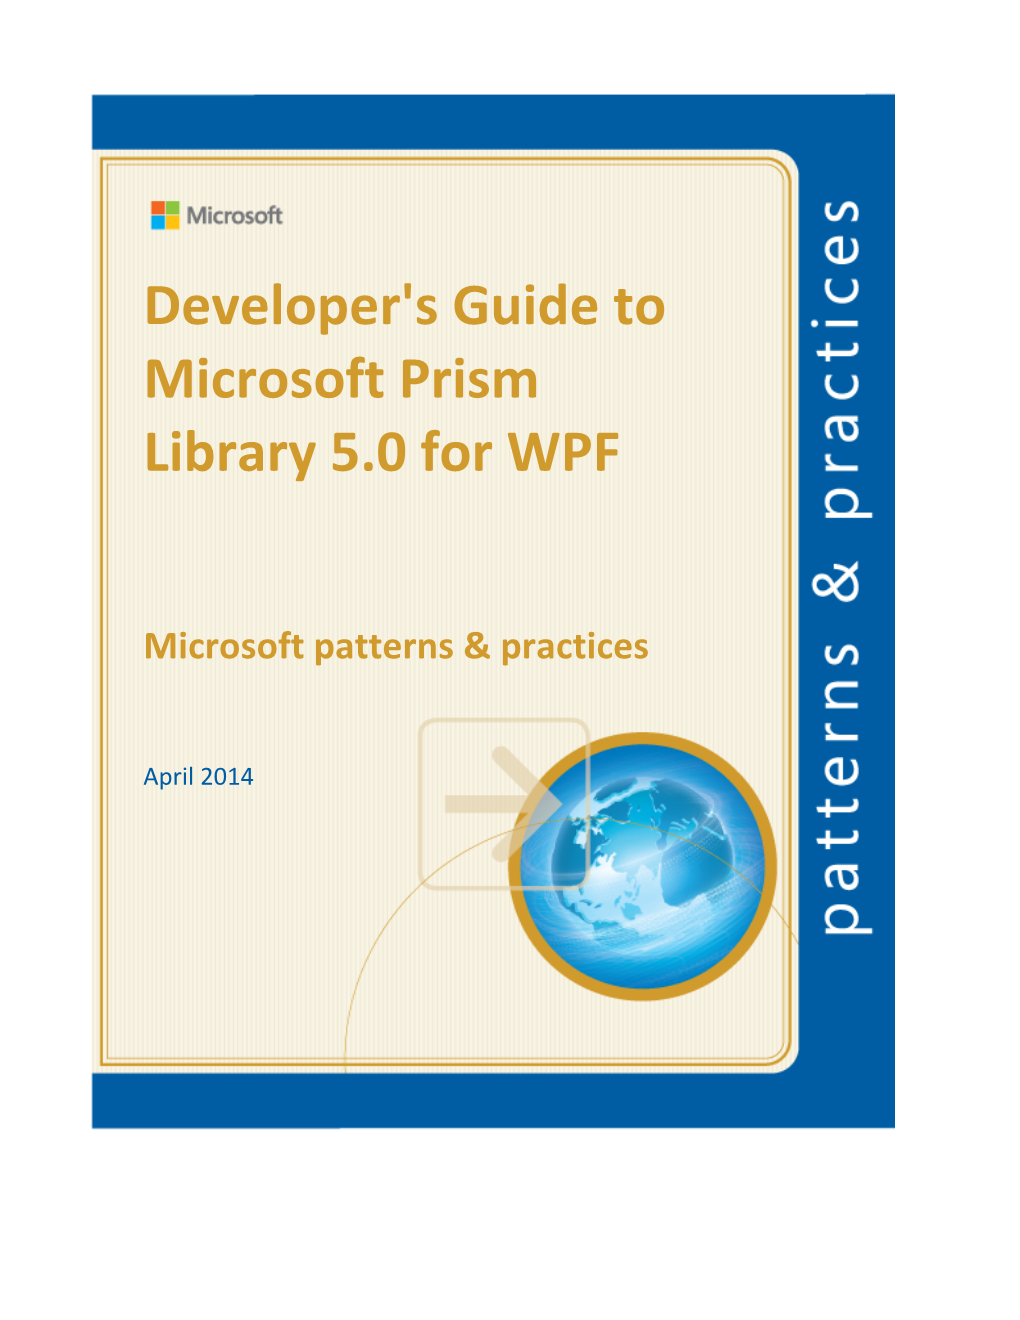 Developer's Guide to Microsoft Prism Library 5.0 for WPF